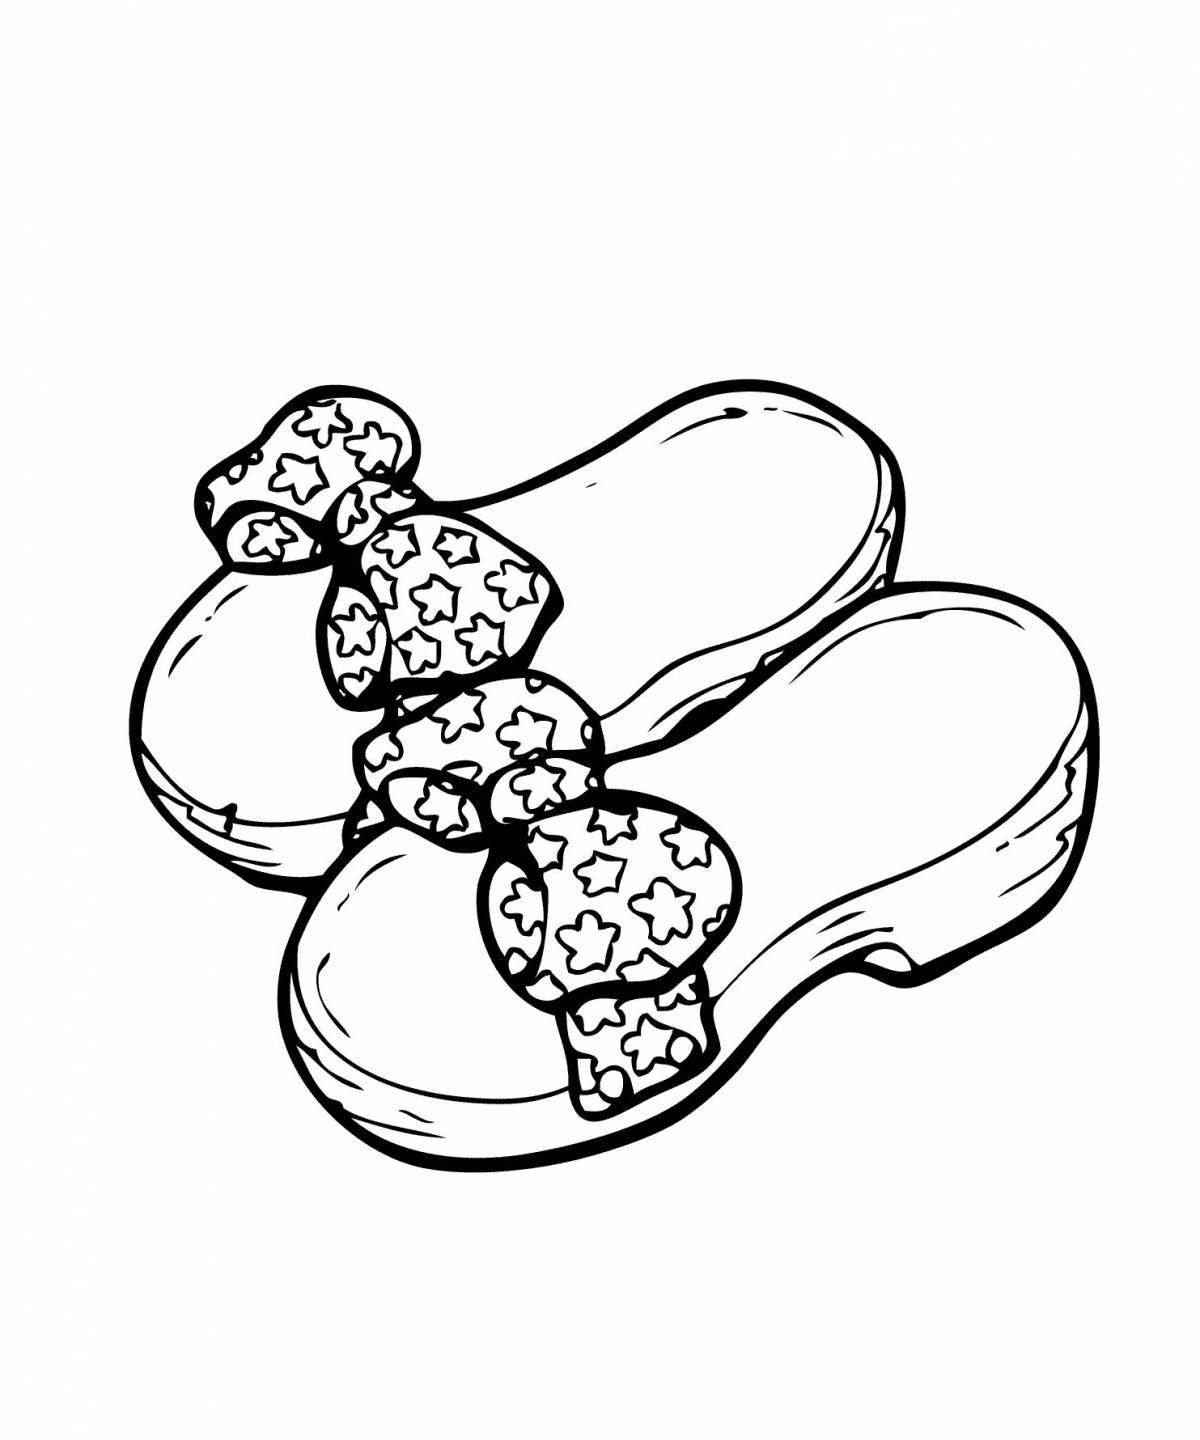 Amazing slippers coloring book for kids